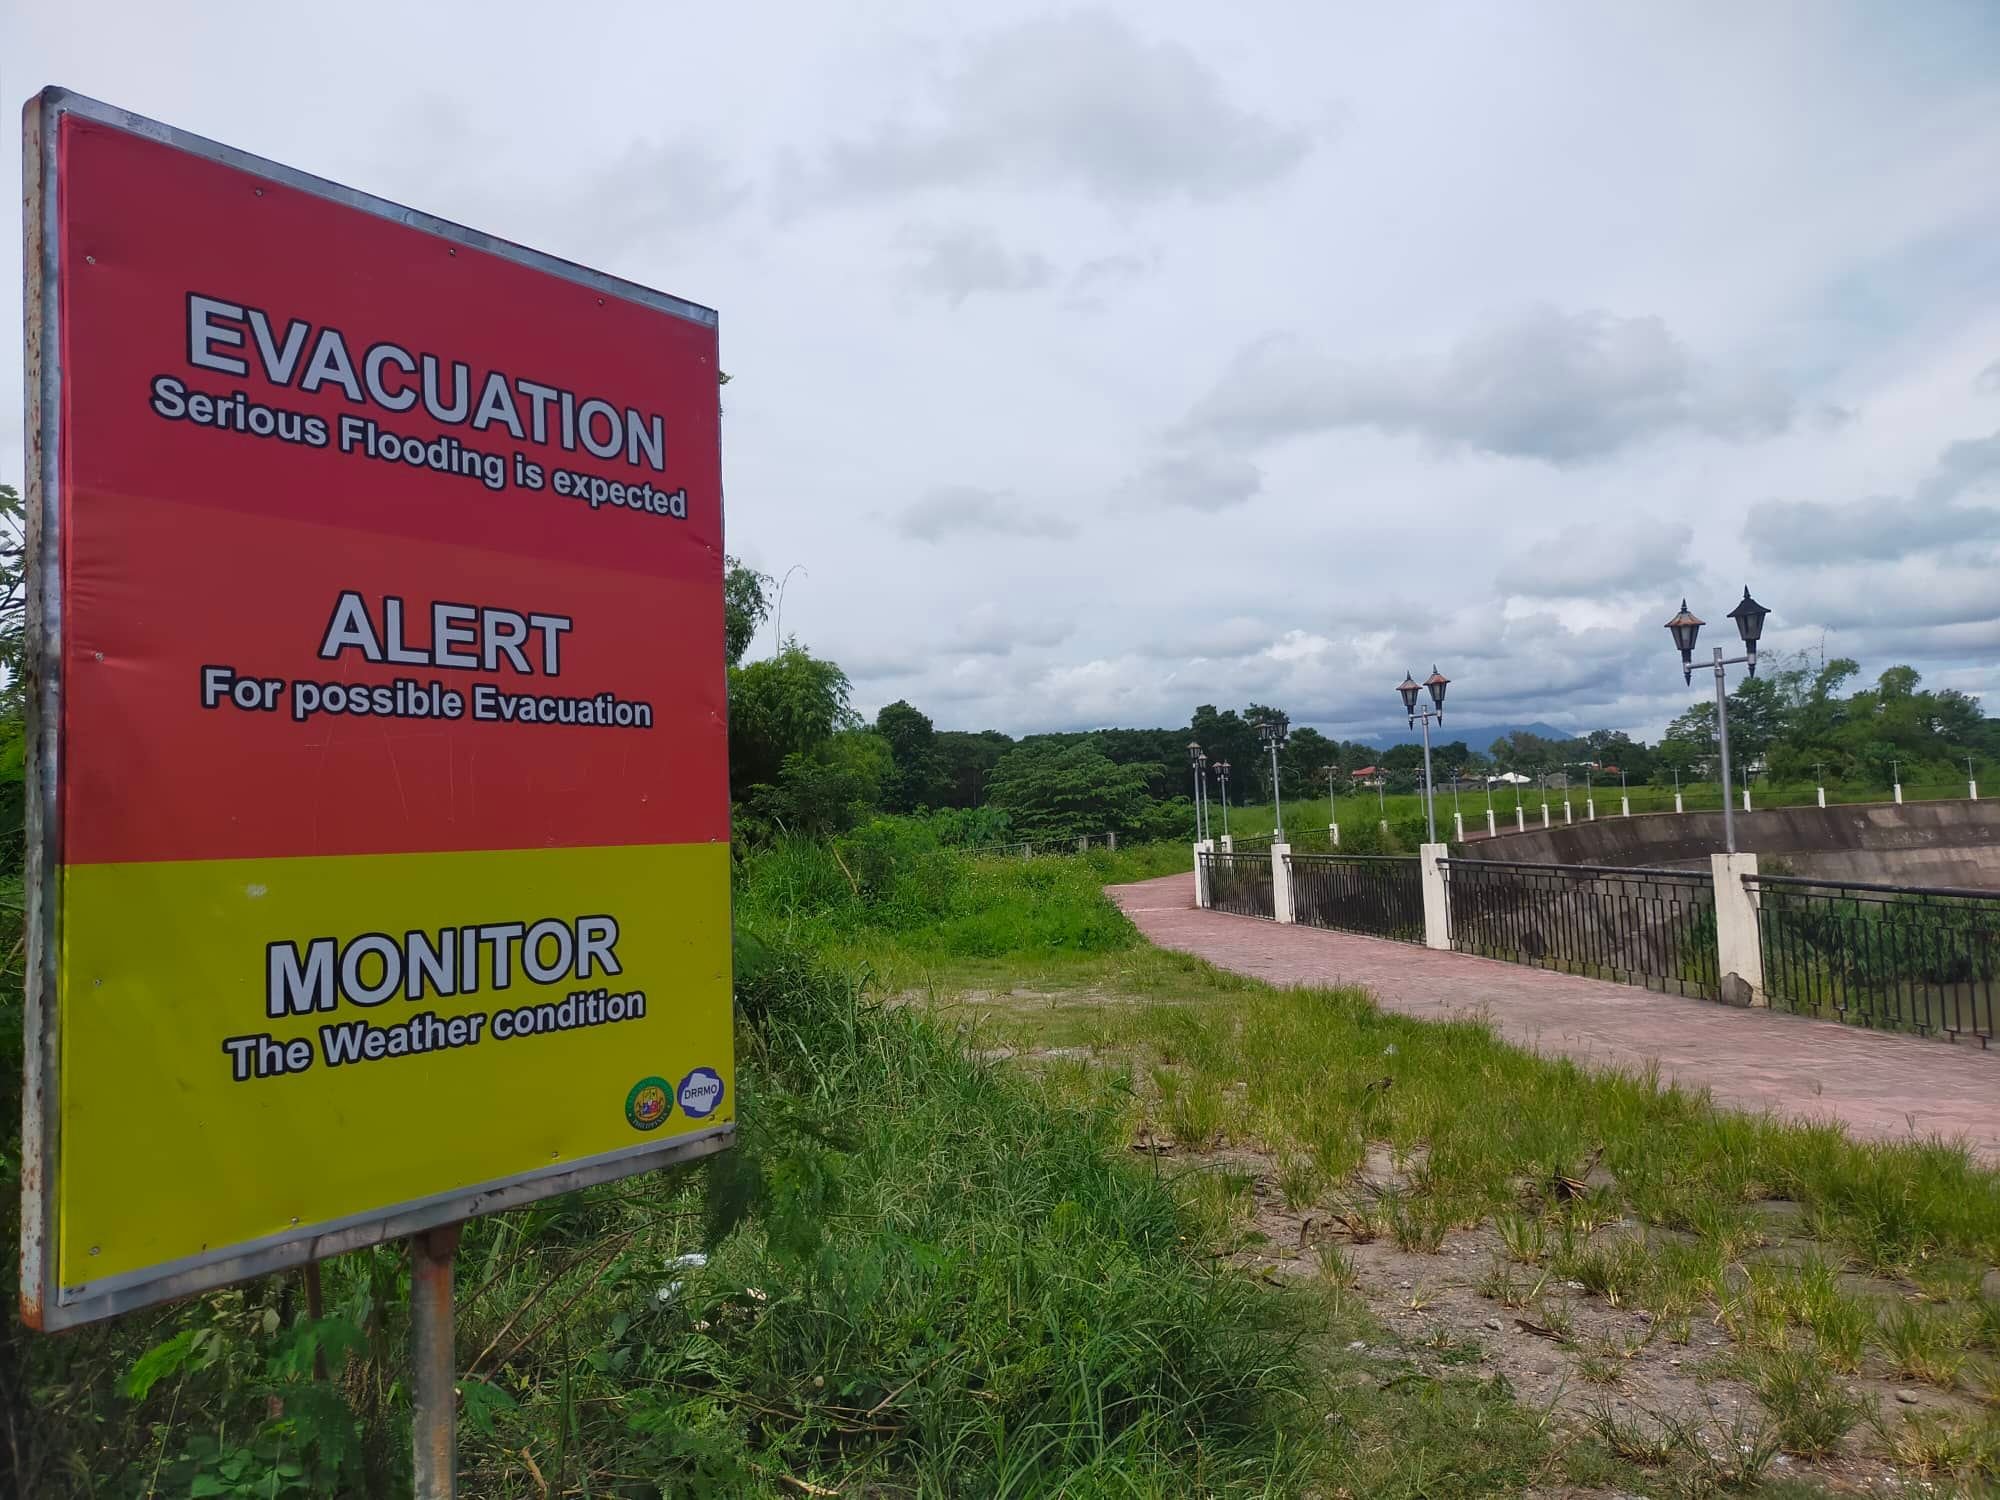 Color-coded warning signs setup by Bacolod City DRRM team – Councilor Jude Thaddeus “Thaddy” Sayson